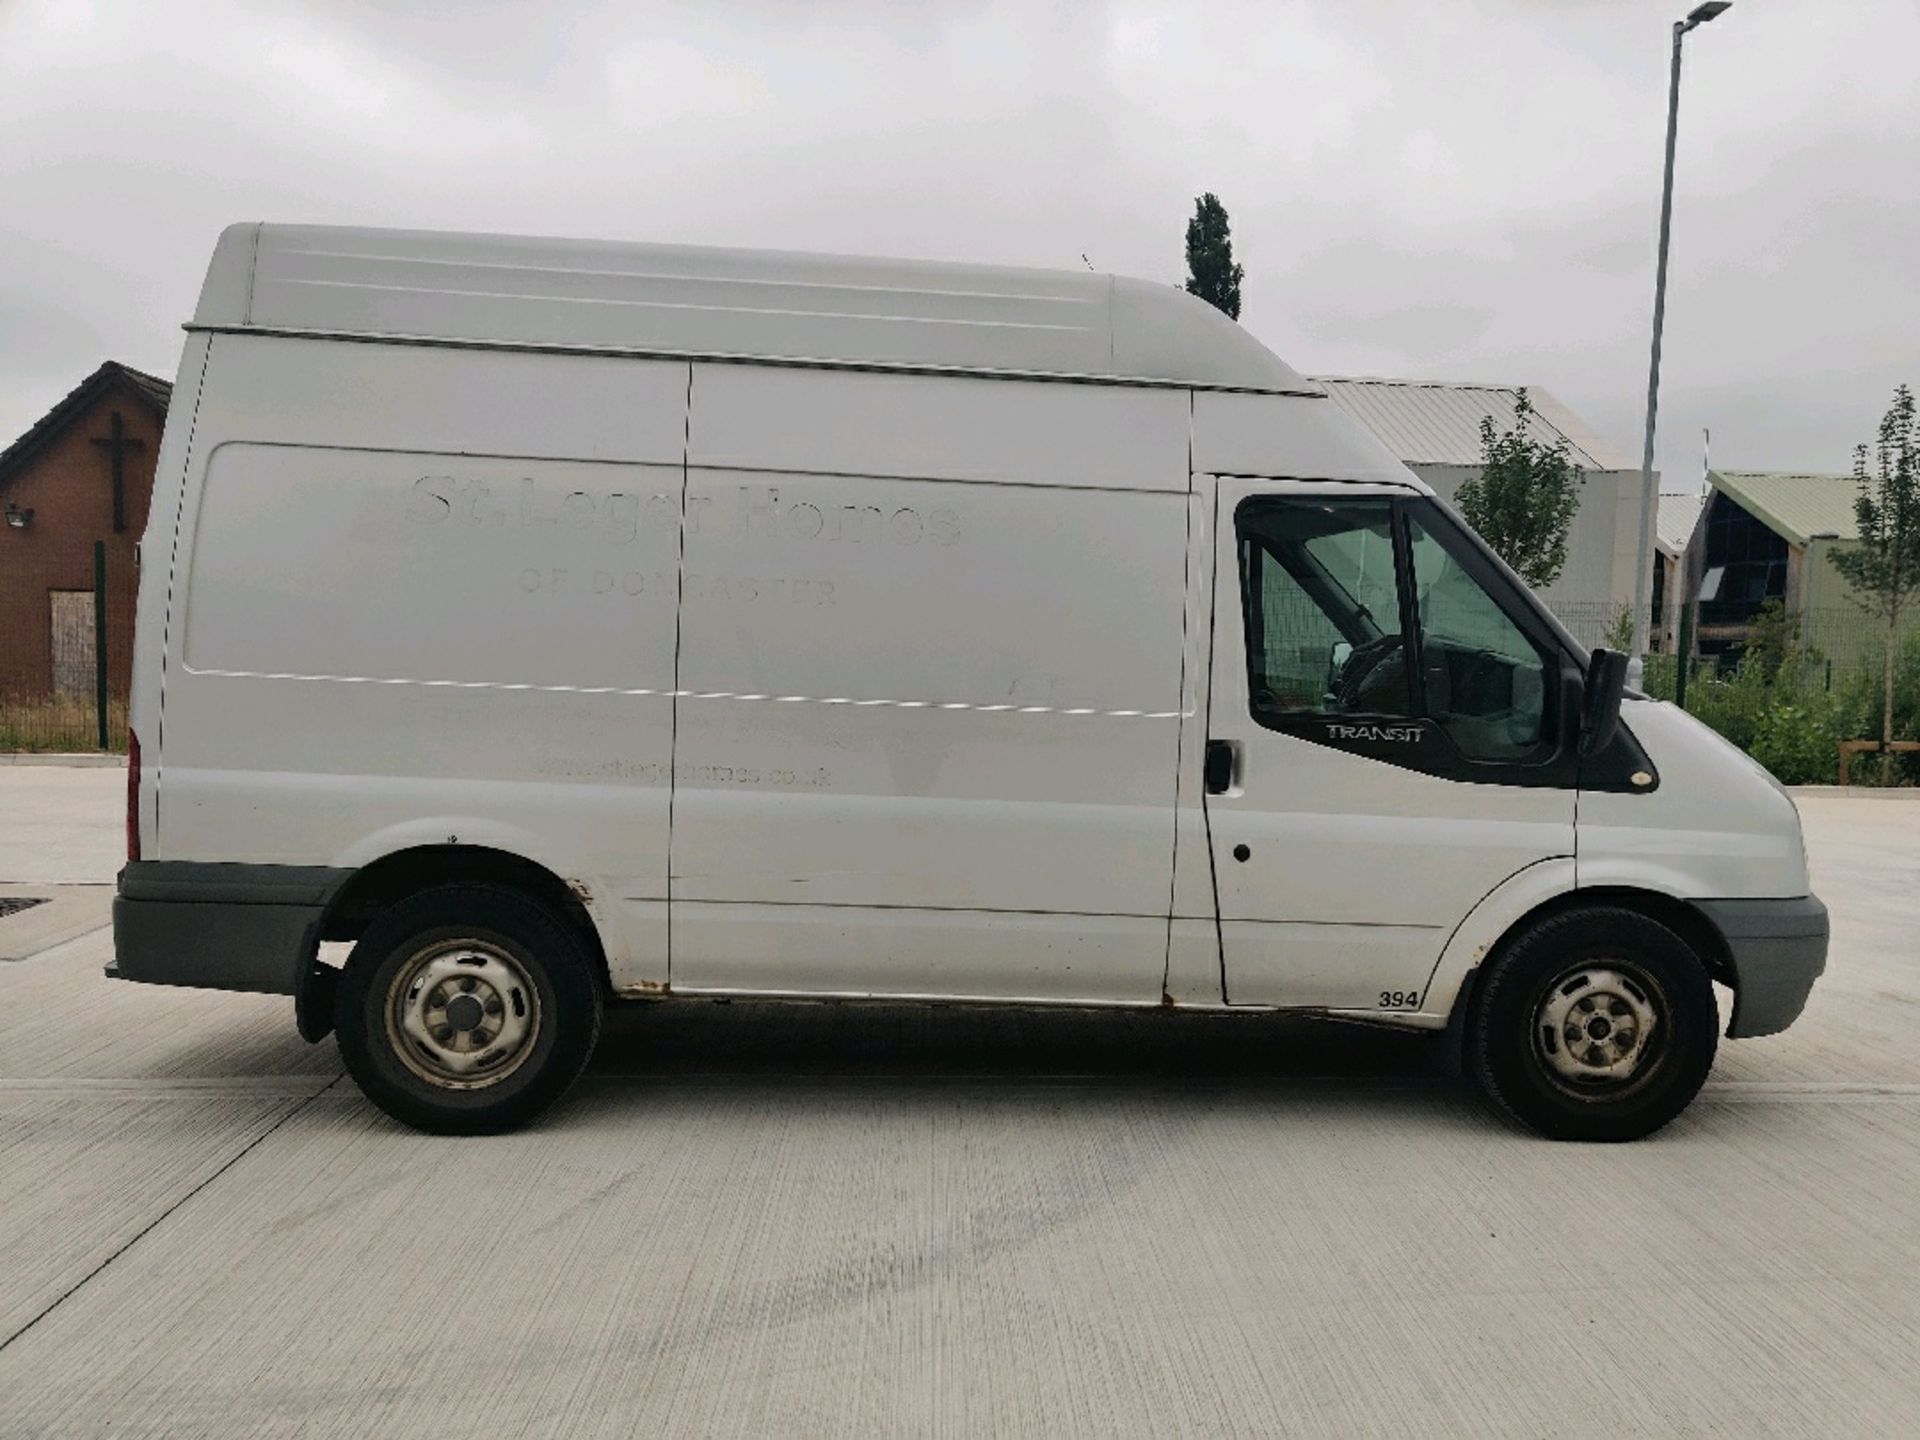 ENTRY DIRECT FROM LOCAL AUTHORITY Ford transit YR59HXD